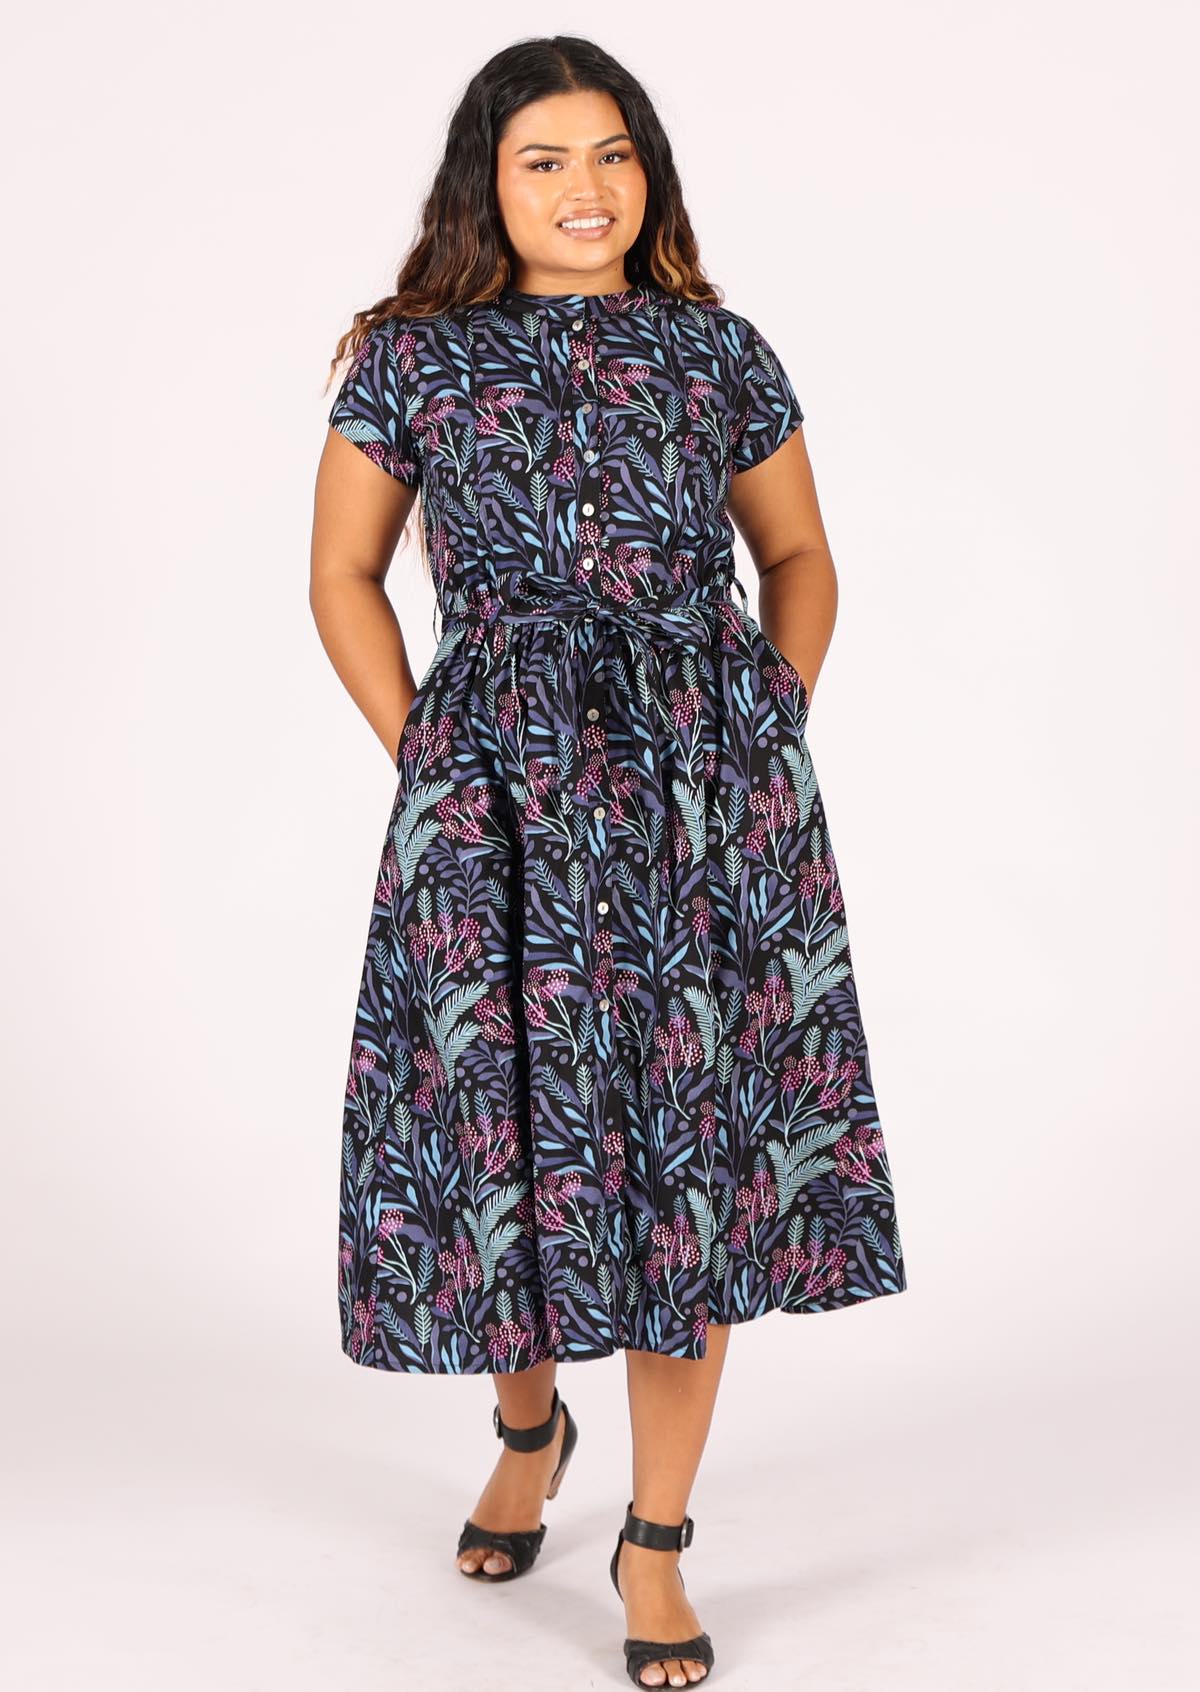 Cotton retro shin length dress with cap sleeves and hidden side pockets